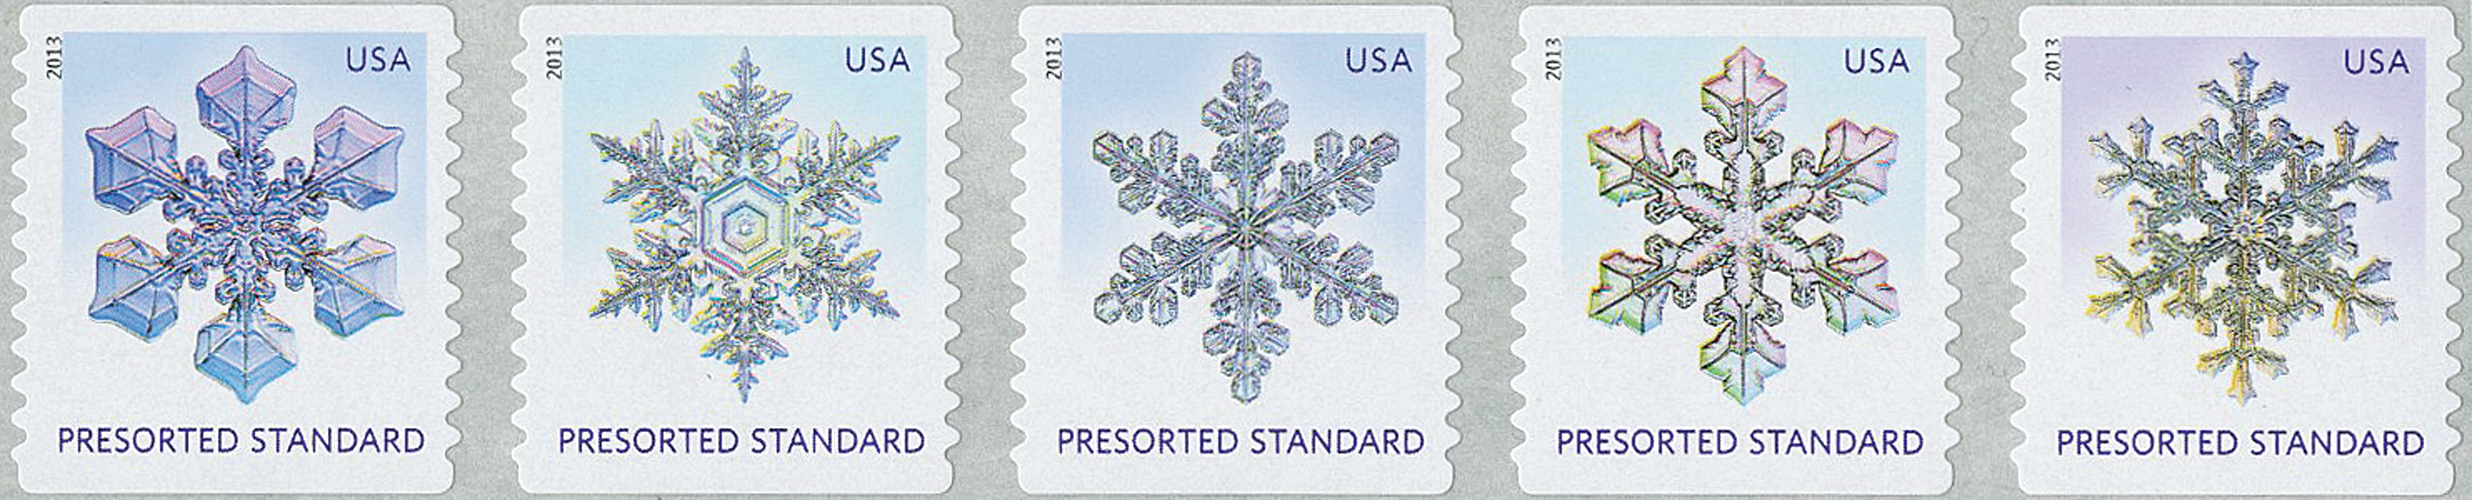 5032 - 2015 First-Class Forever Stamp - Geometric Snowflakes: Blue - Mystic  Stamp Company